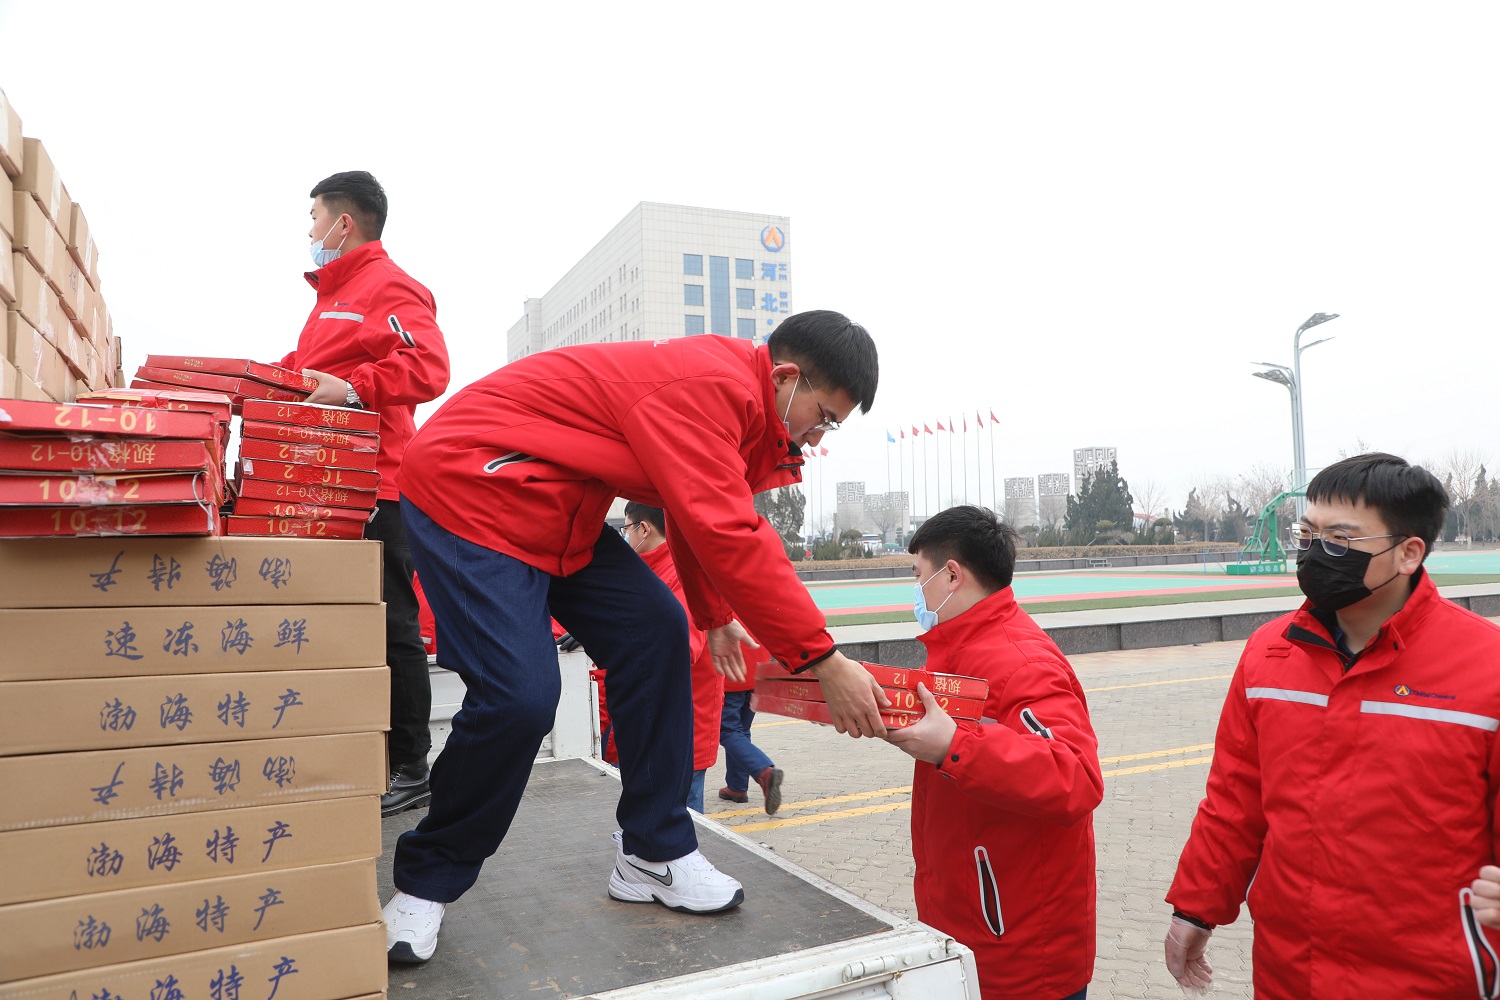 Xinhai Holding Group continuously issued Spring Festival benefits to warm the hearts of employees